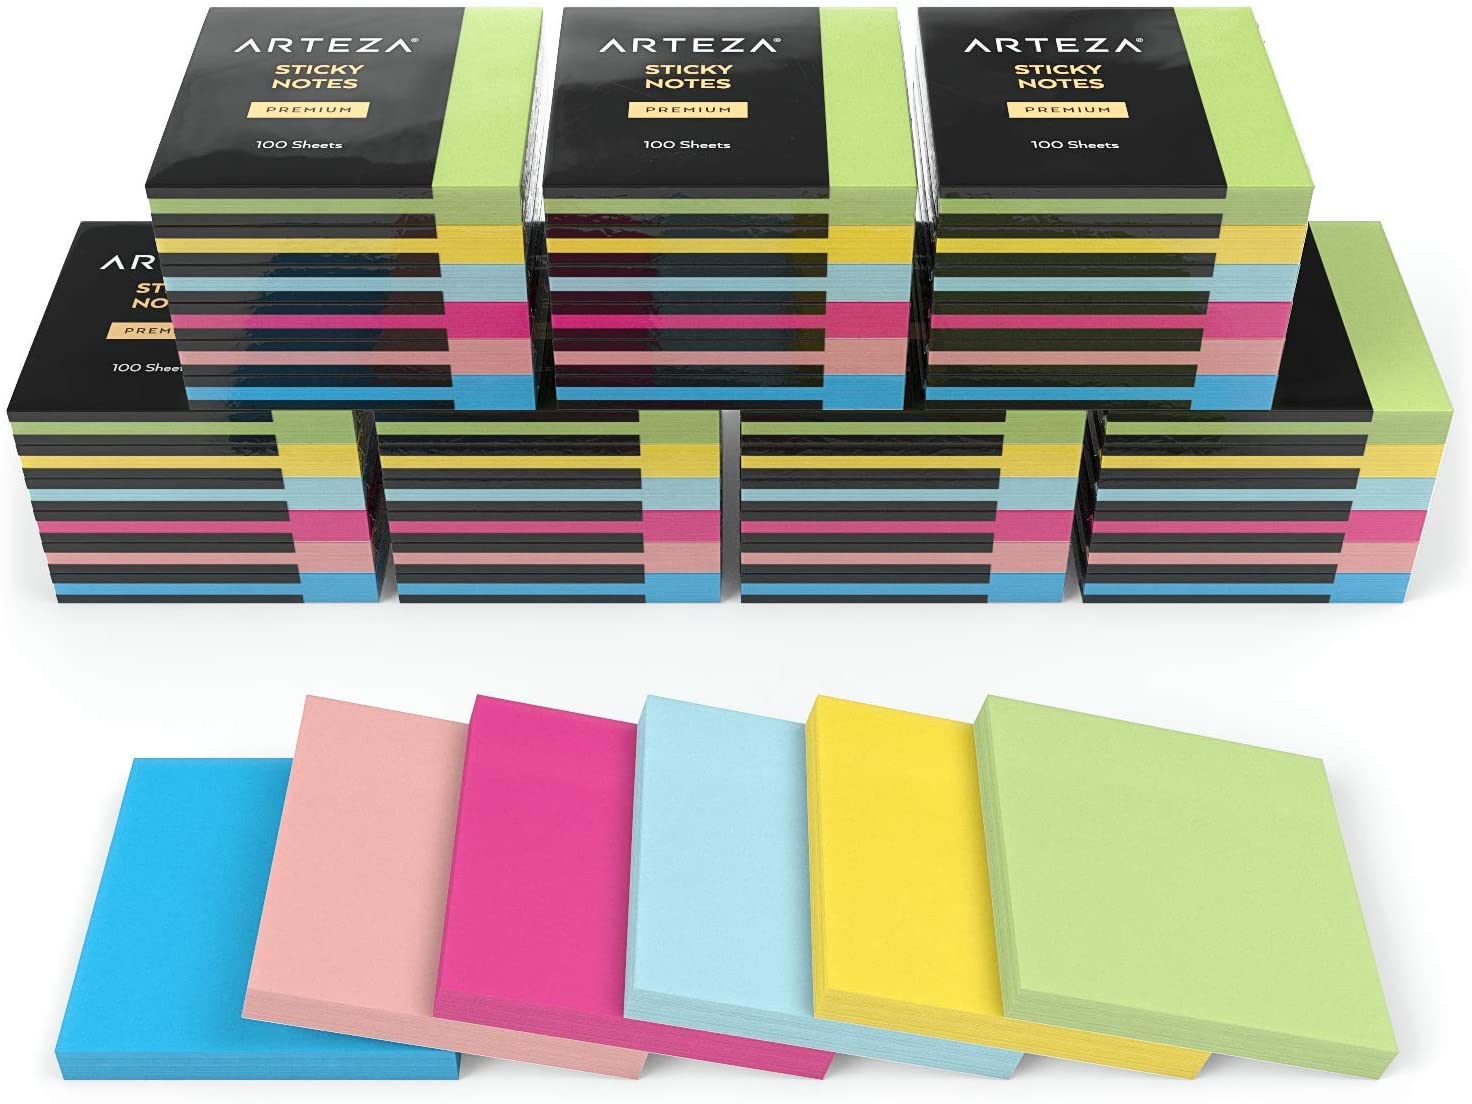 Arteza Sticky Notes 3x3 Inches 48 Pads 100 Sheets Per Pad Bulk